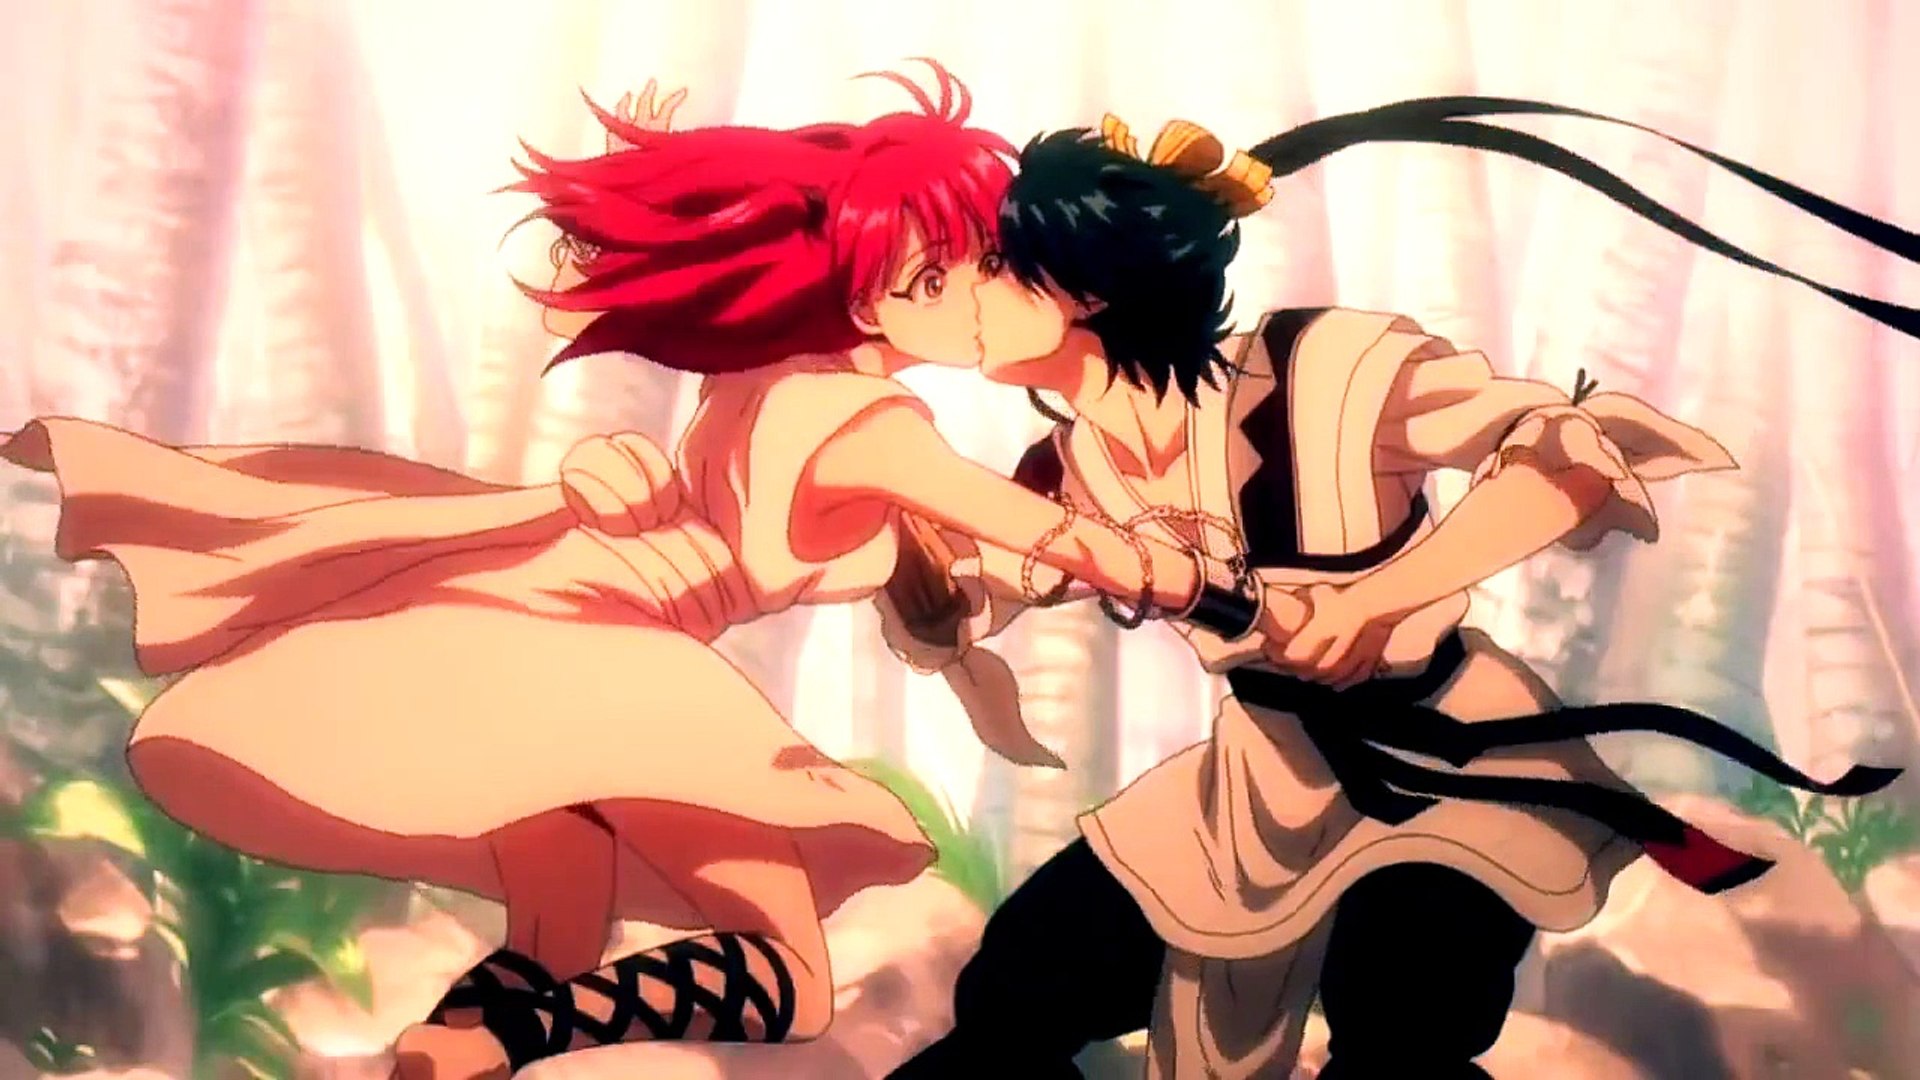 Top 10 Anime Kiss Scenes ♥ ~Part 3~ [HD] - Dailymotion Video